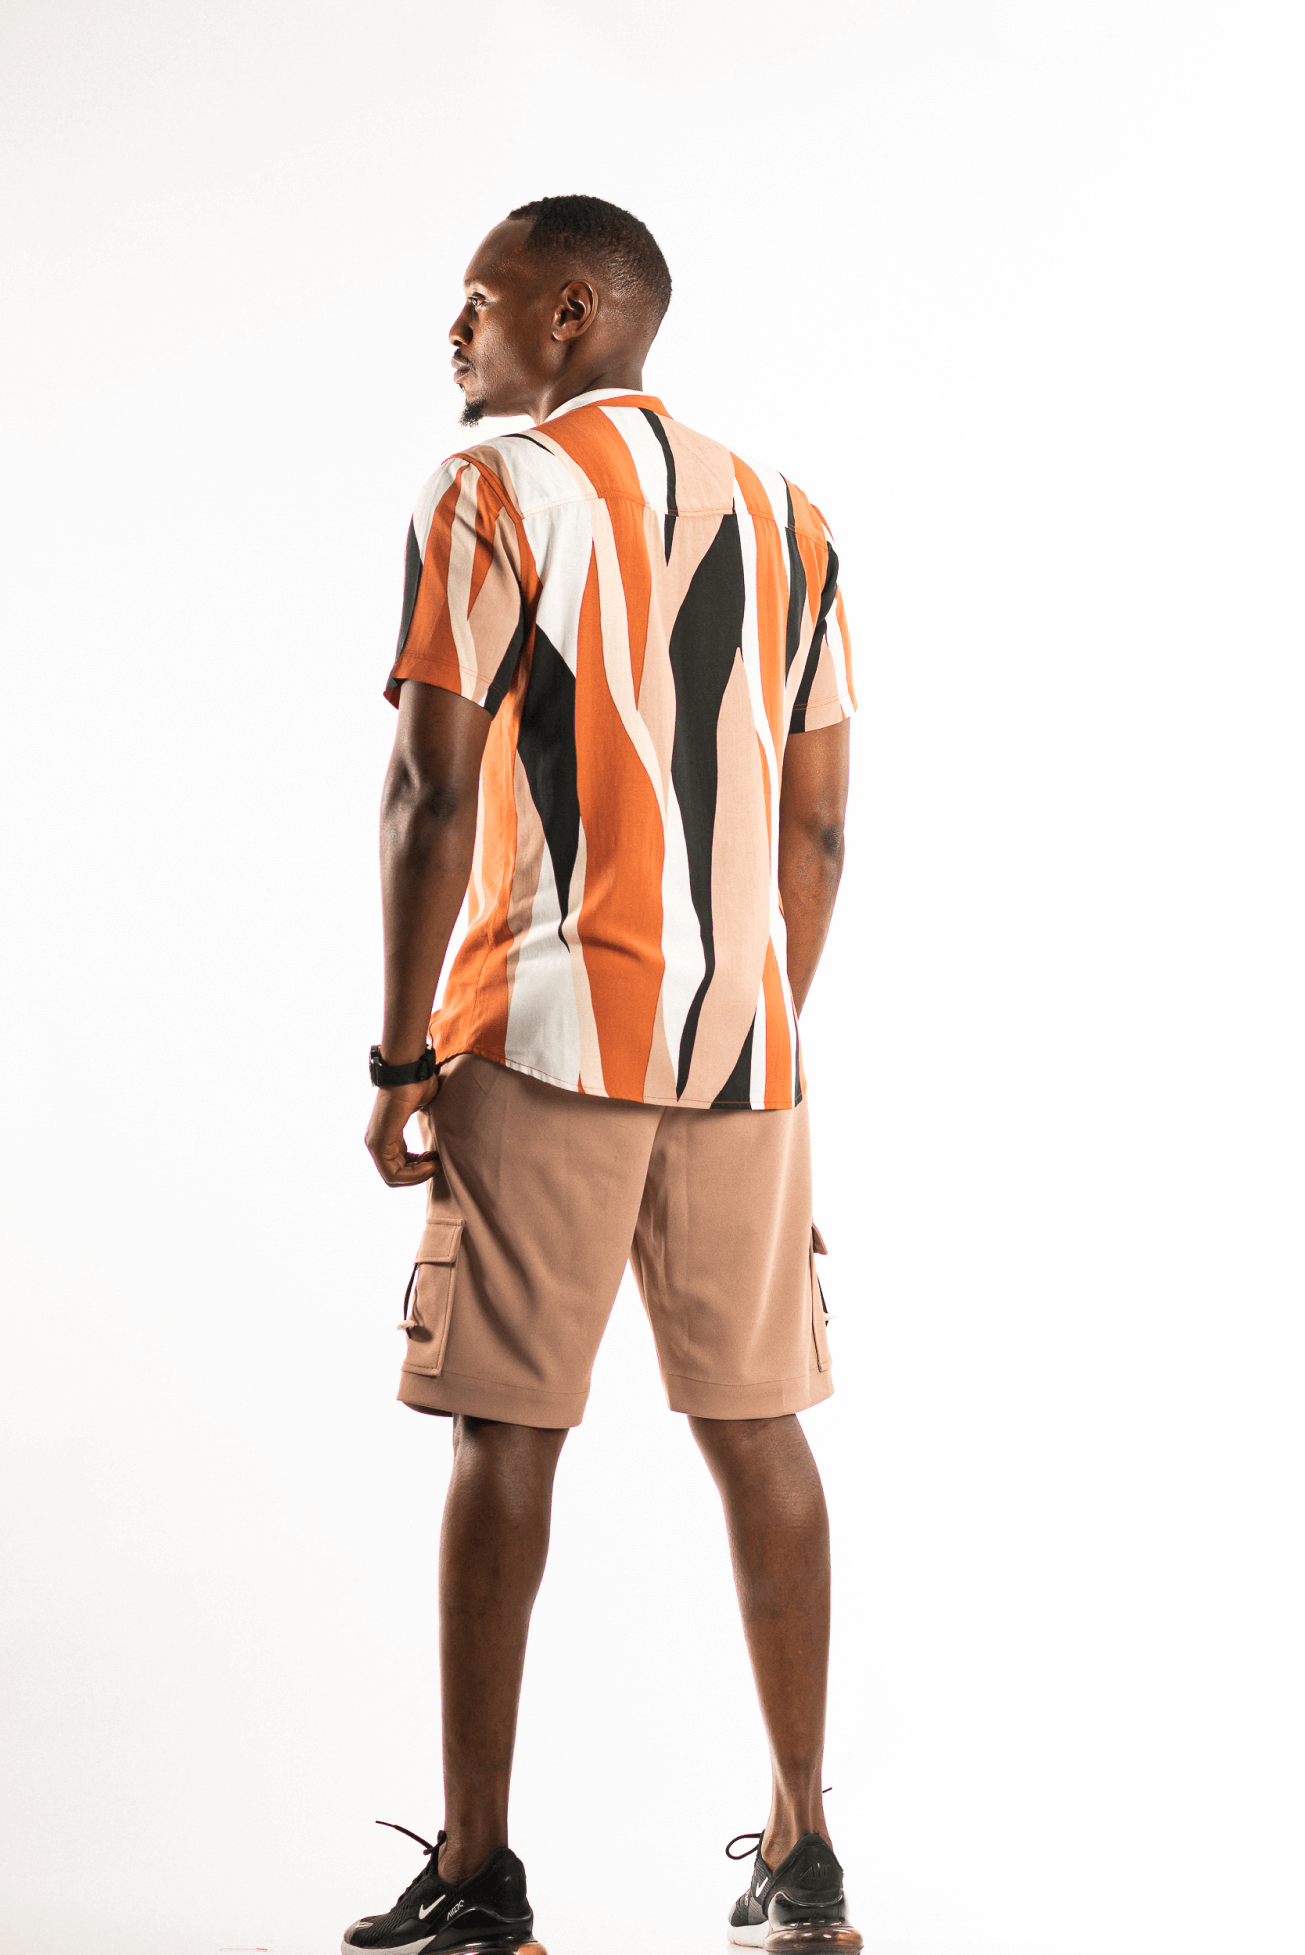 Shop NC Jersey Shorts by NC Nairobi on Arrai. Discover stylish, affordable clothing, jewelry, handbags and unique handmade pieces from top Kenyan & African fashion brands prioritising sustainability and quality craftsmanship.